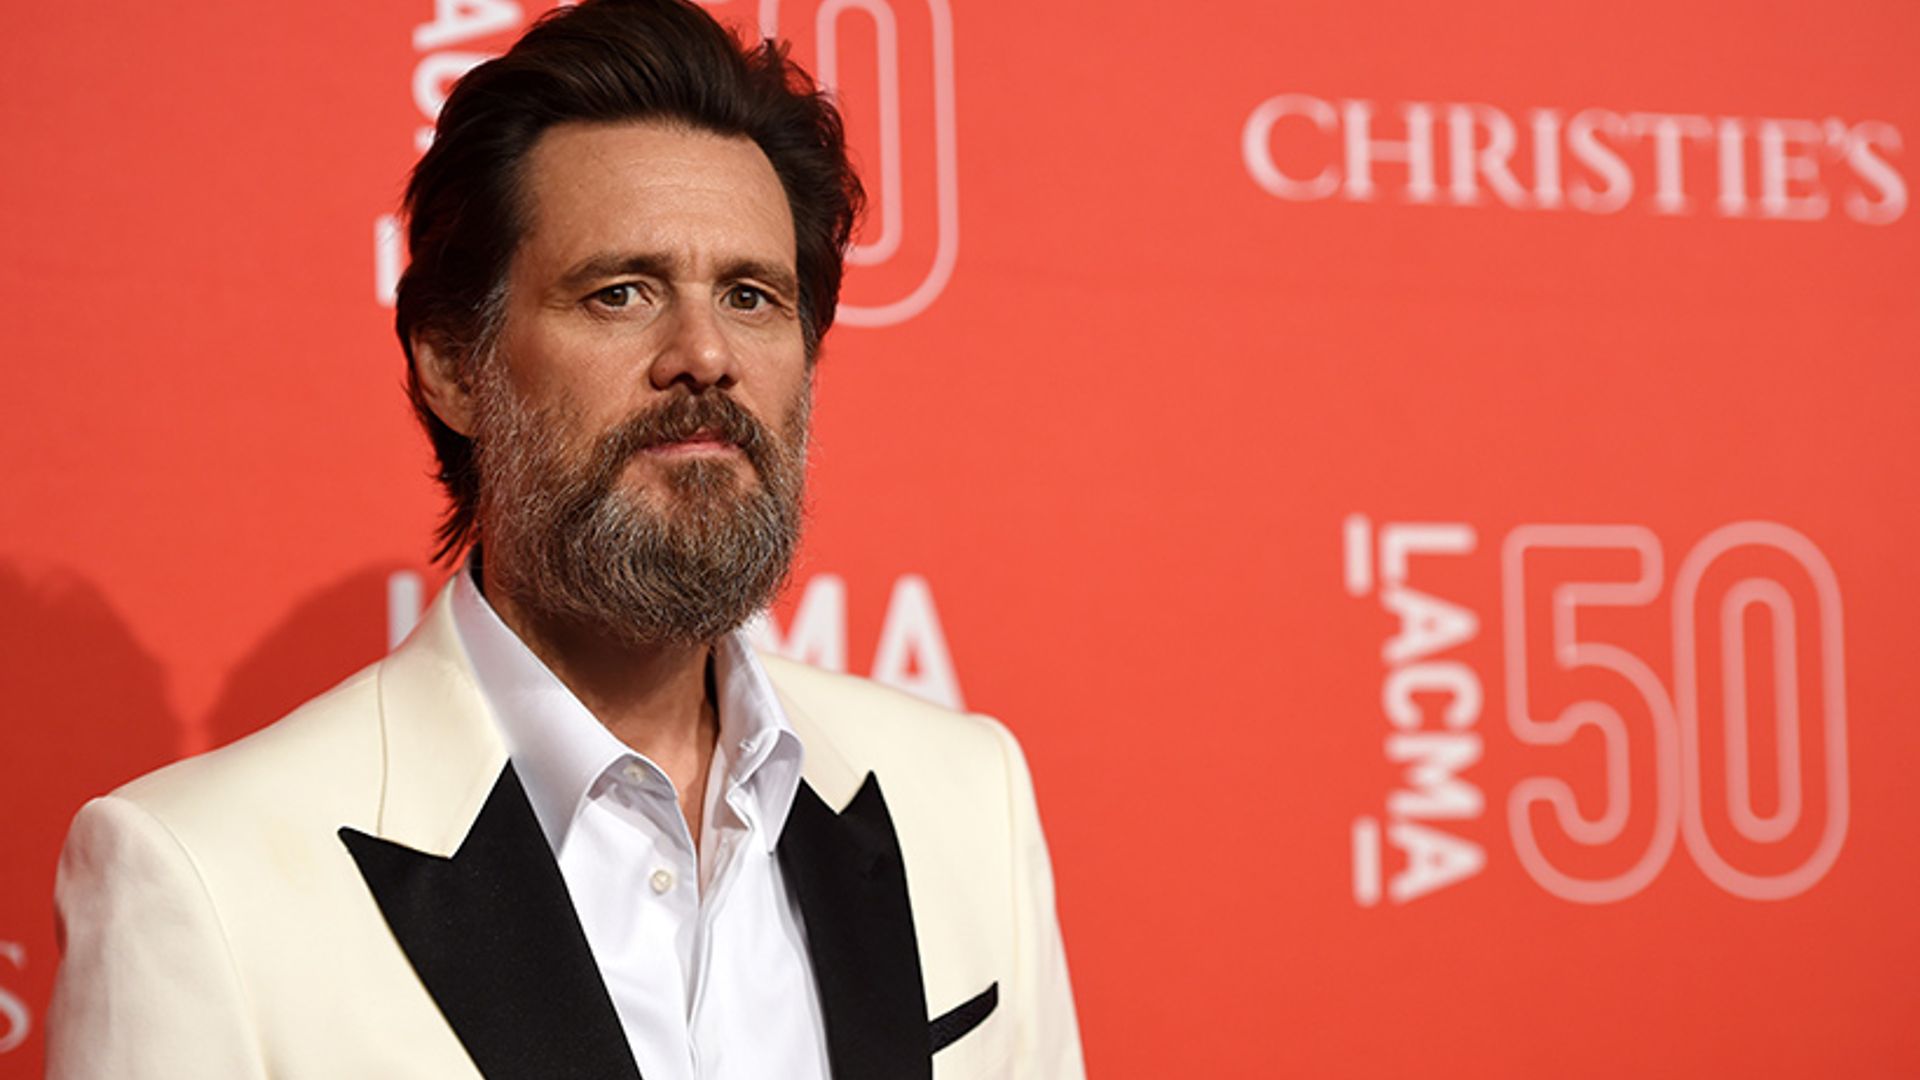 Jim Carrey responds to wrongful death lawsuit